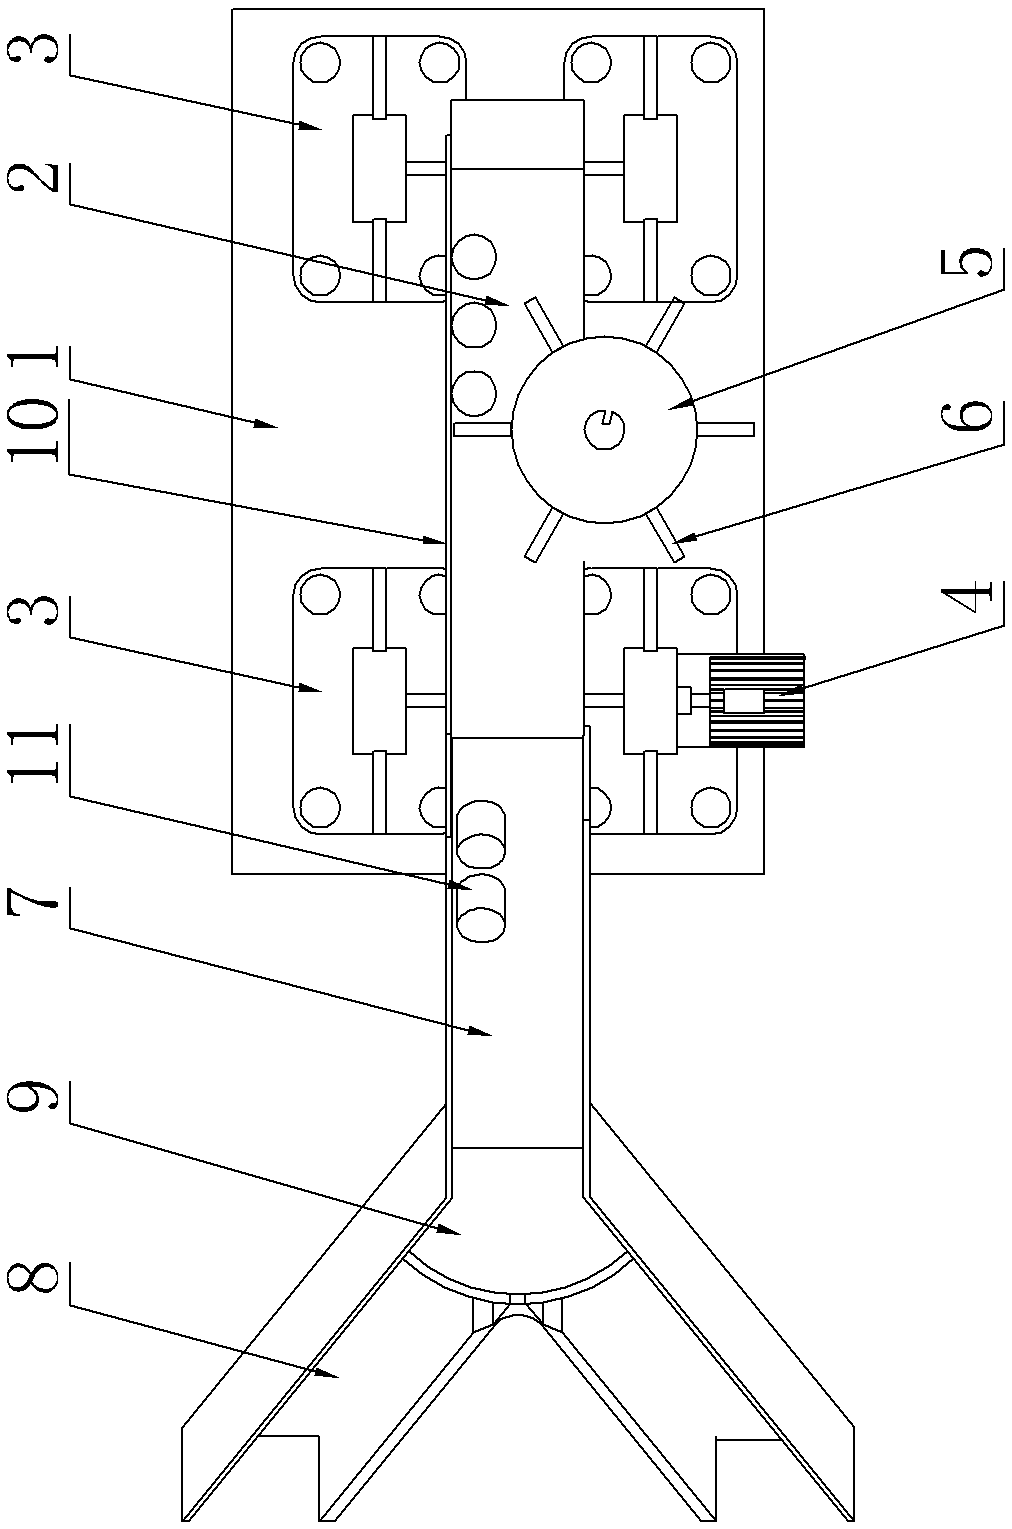 Sub-packaging and conveying device of columnar parts